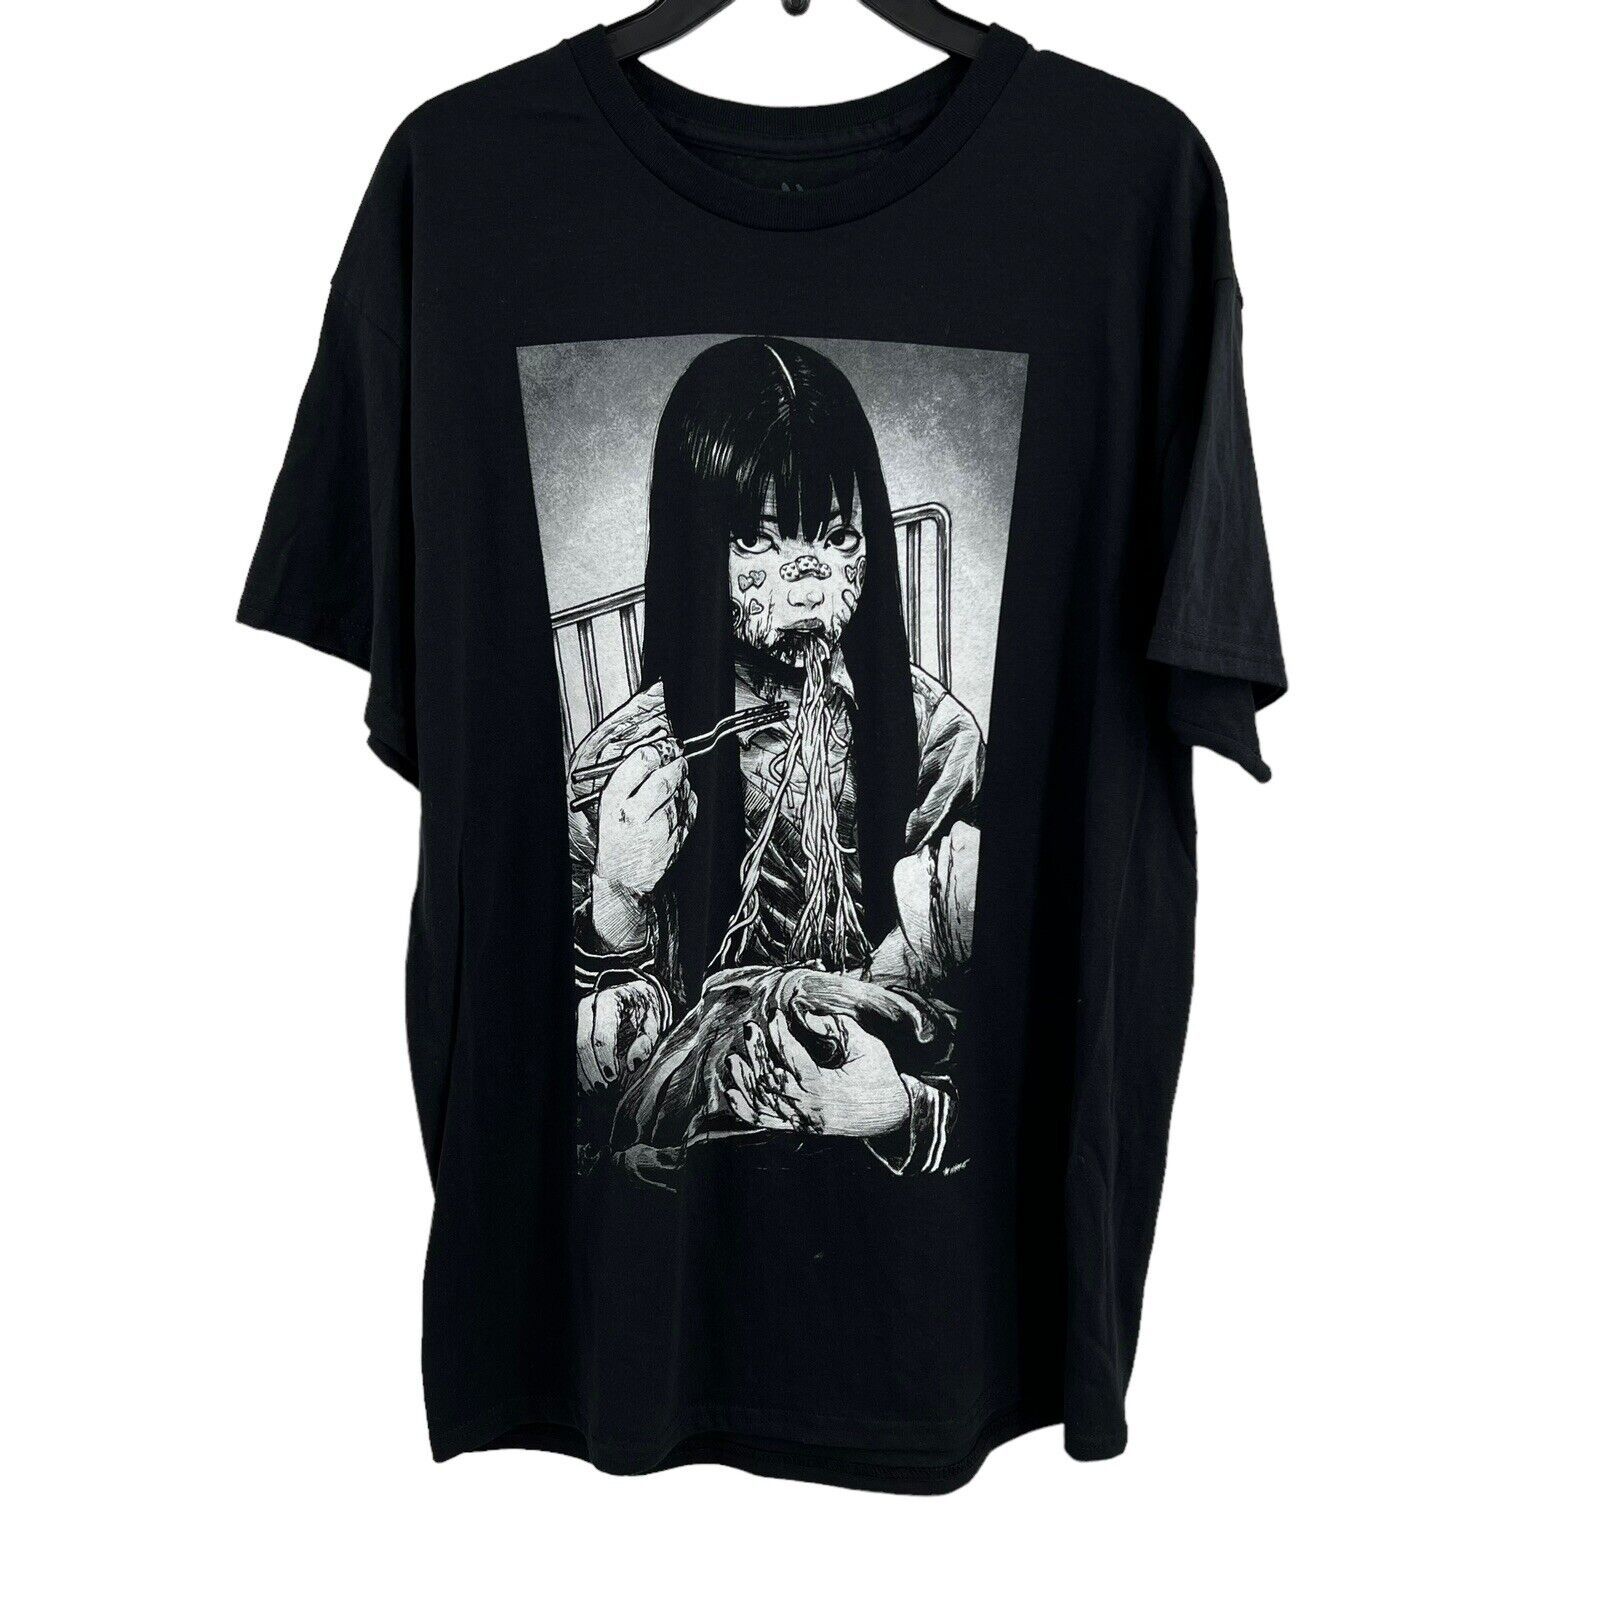 Primary image for Mako Noodles Tee Shirt Black New Small